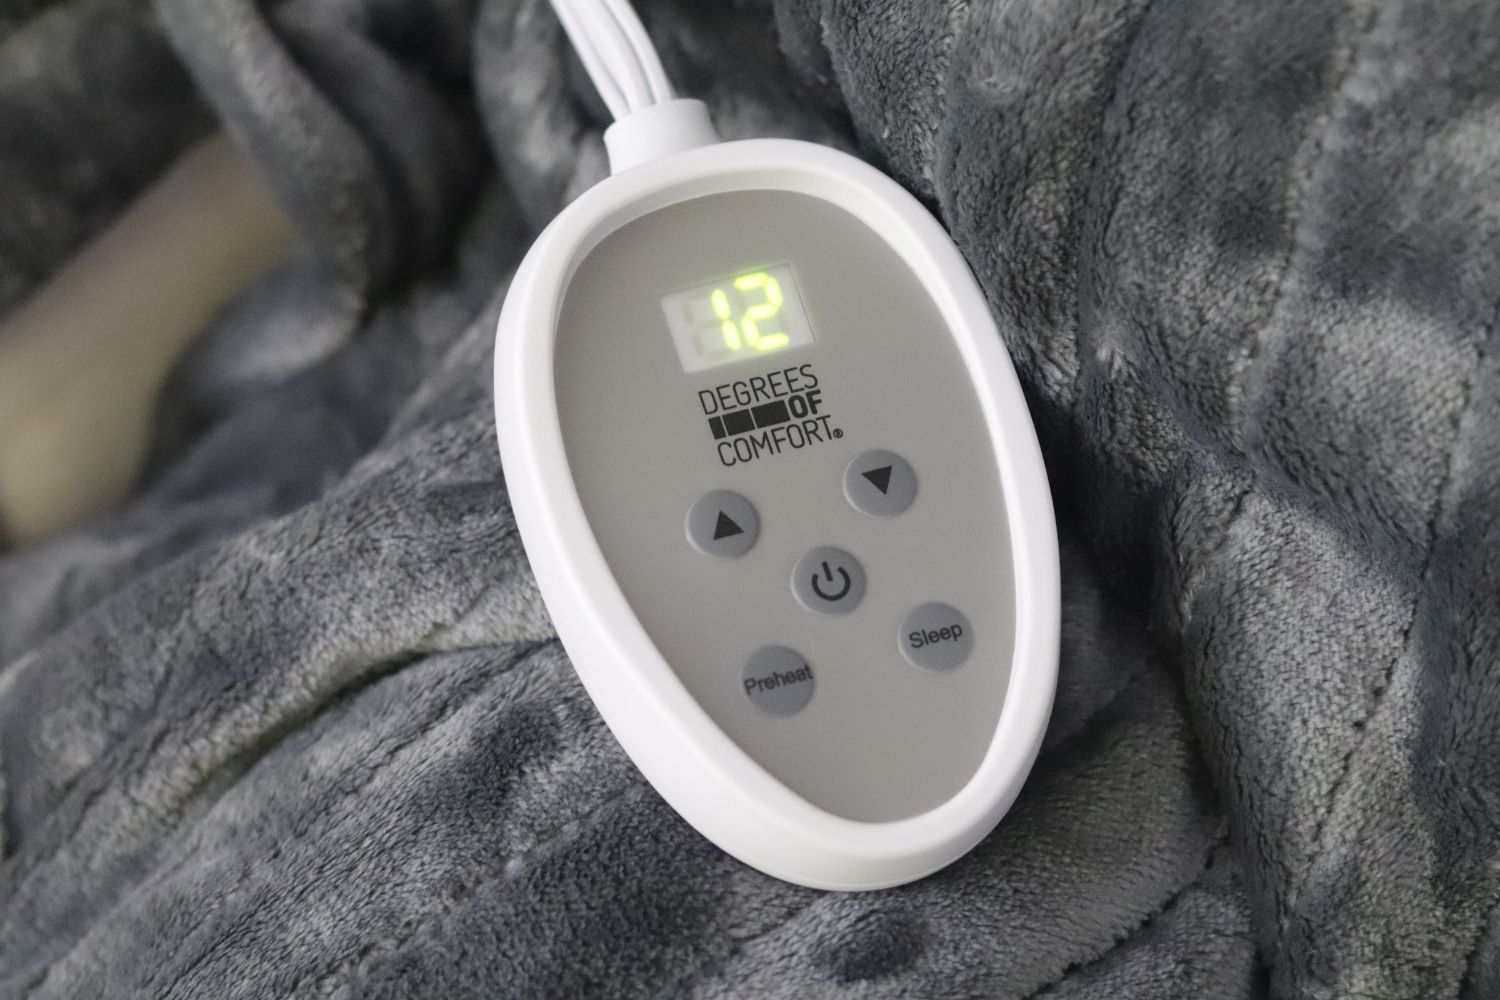 The controller of the best electric blanket on top of the blanket showing a heat setting of 12.